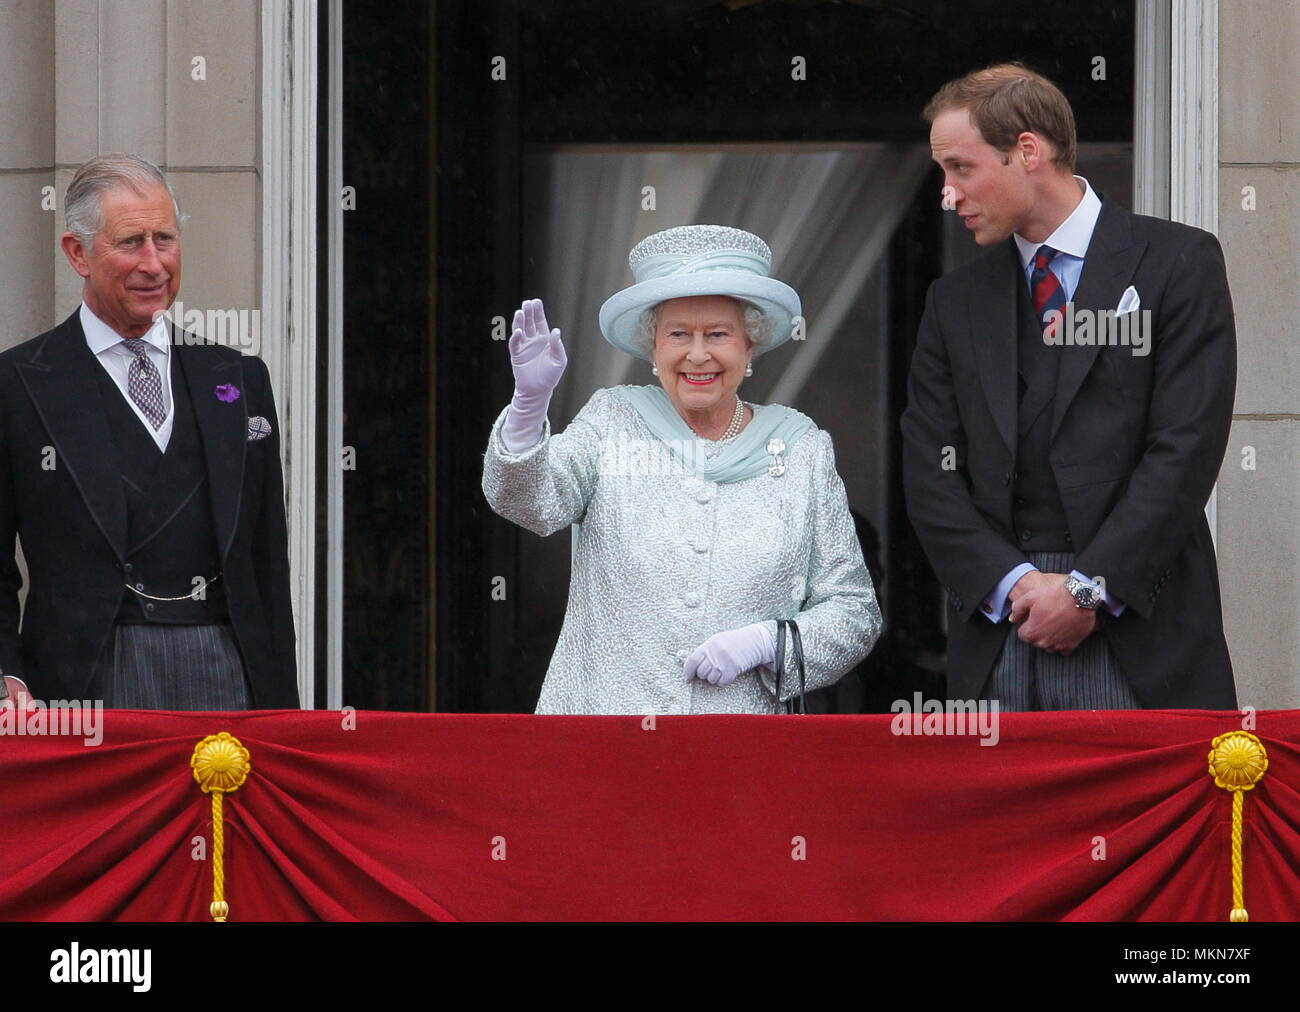 Queen Elizabeth II with the future kings - Prince Charles (now King Charles III) and Prince William (now Prince of Wales) on the balcony of Buckingham Palace to commemorate the 60th anniversary of the accession of the Queen, London. 5 June 2012 --- Image by © Paul Cunningham Stock Photo